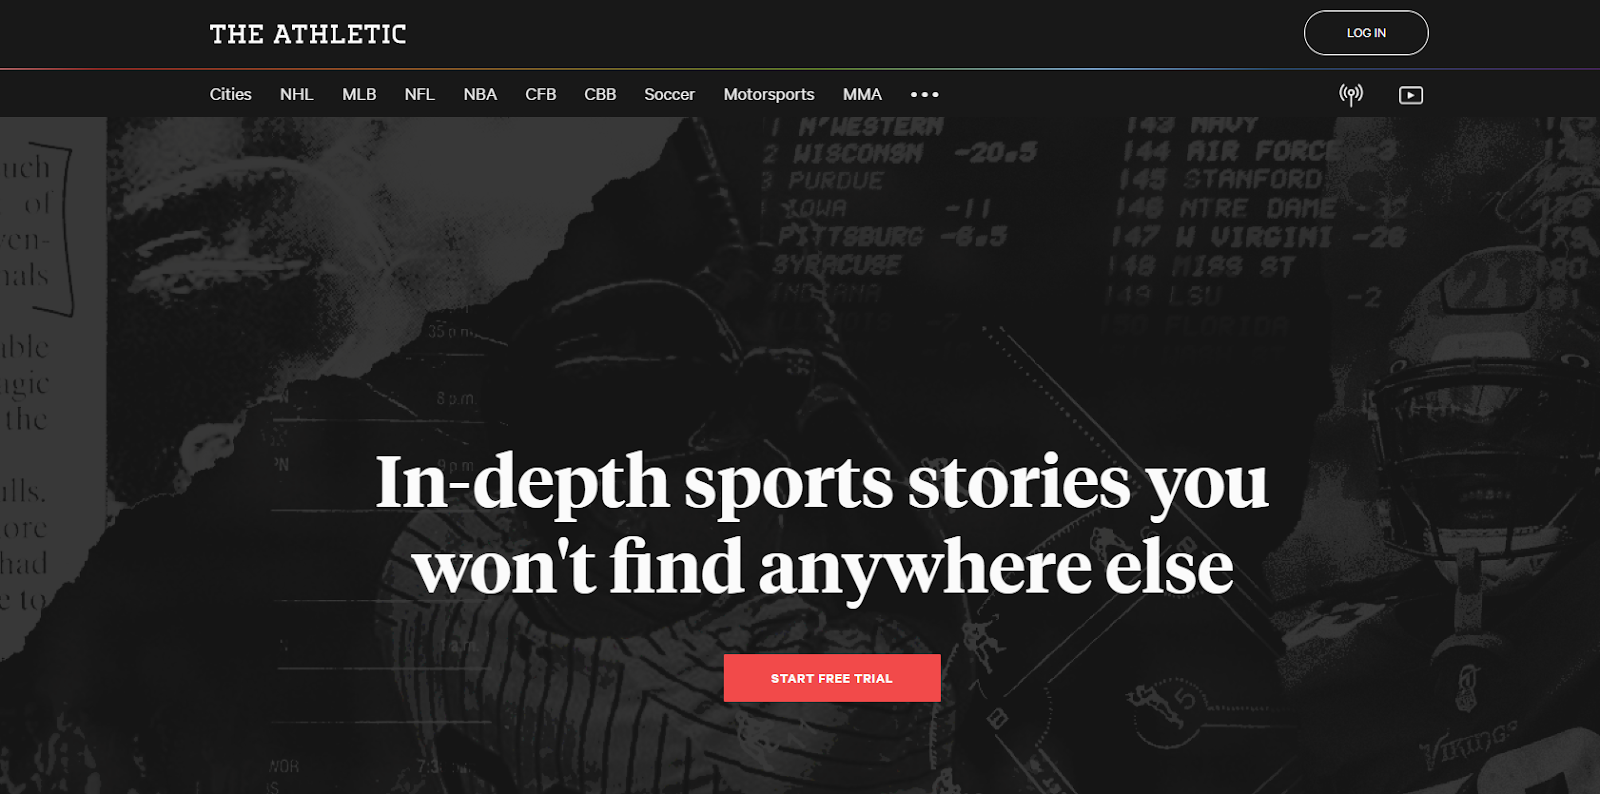 the athletic homepage.